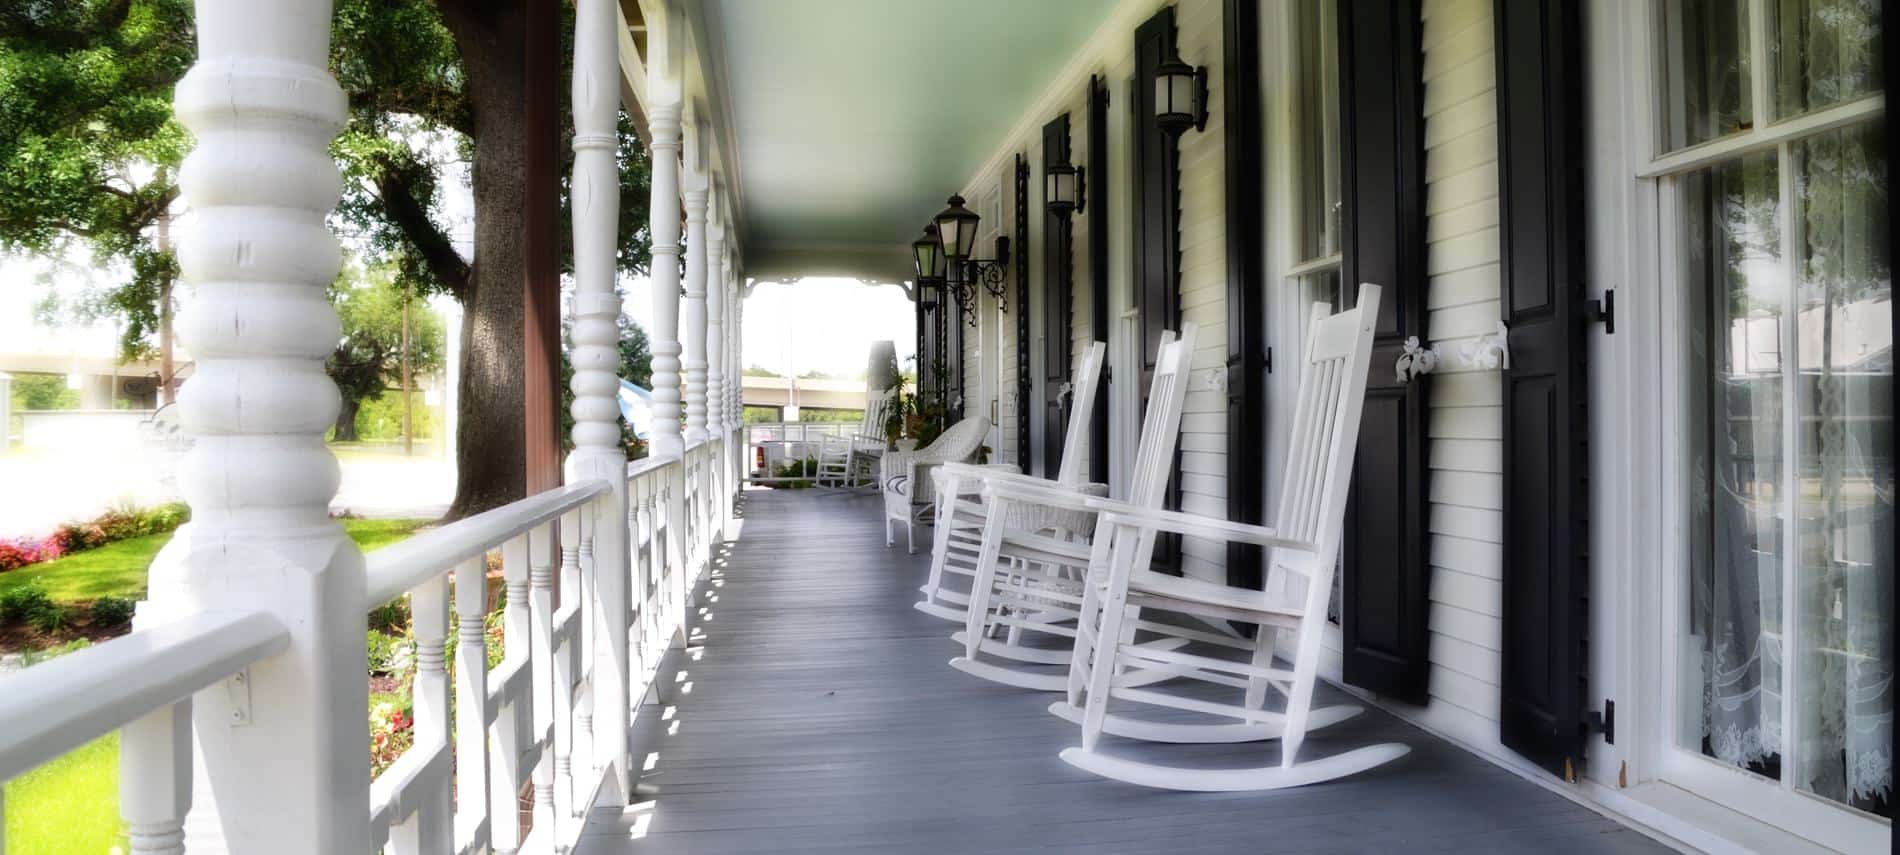 Long covered porch with windows, black shutters, painted wood floor, white railing, posts and rocking chairs